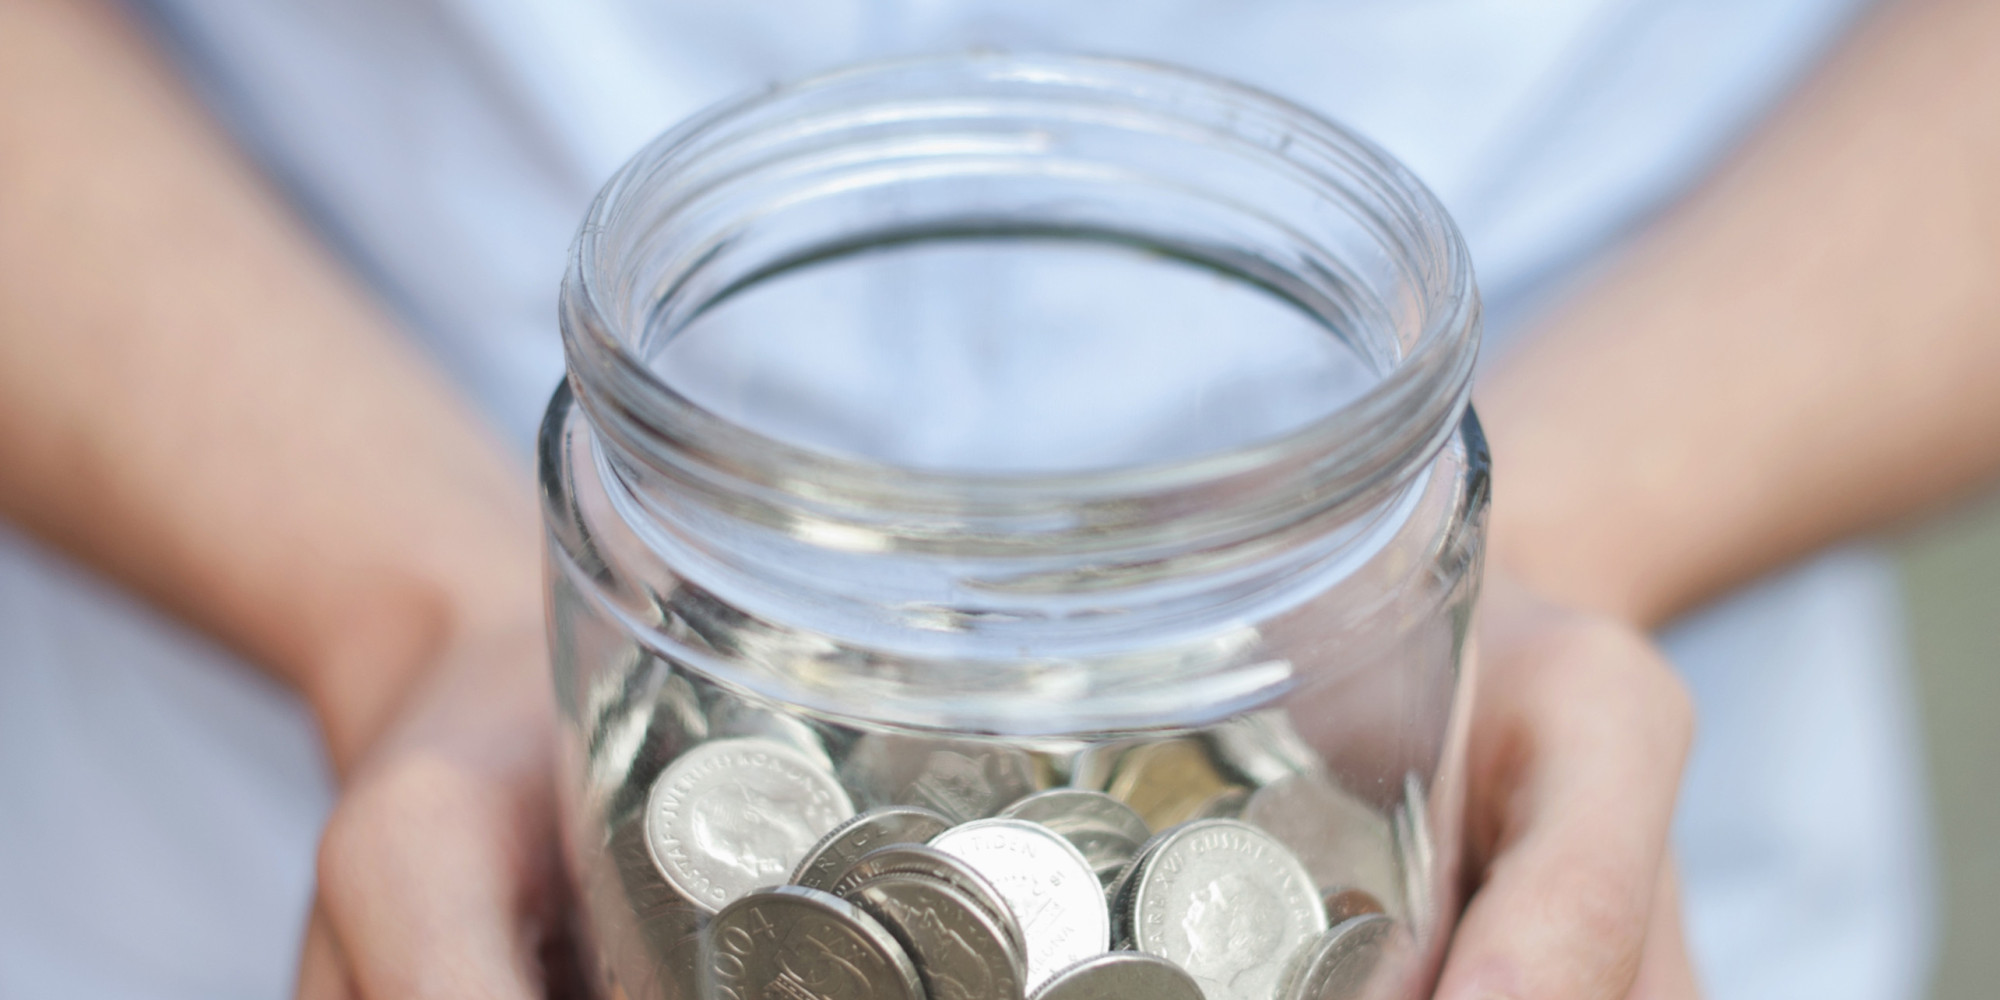 27 Sneaky Ways To Save $100s A Month | HuffPost2000 x 1000